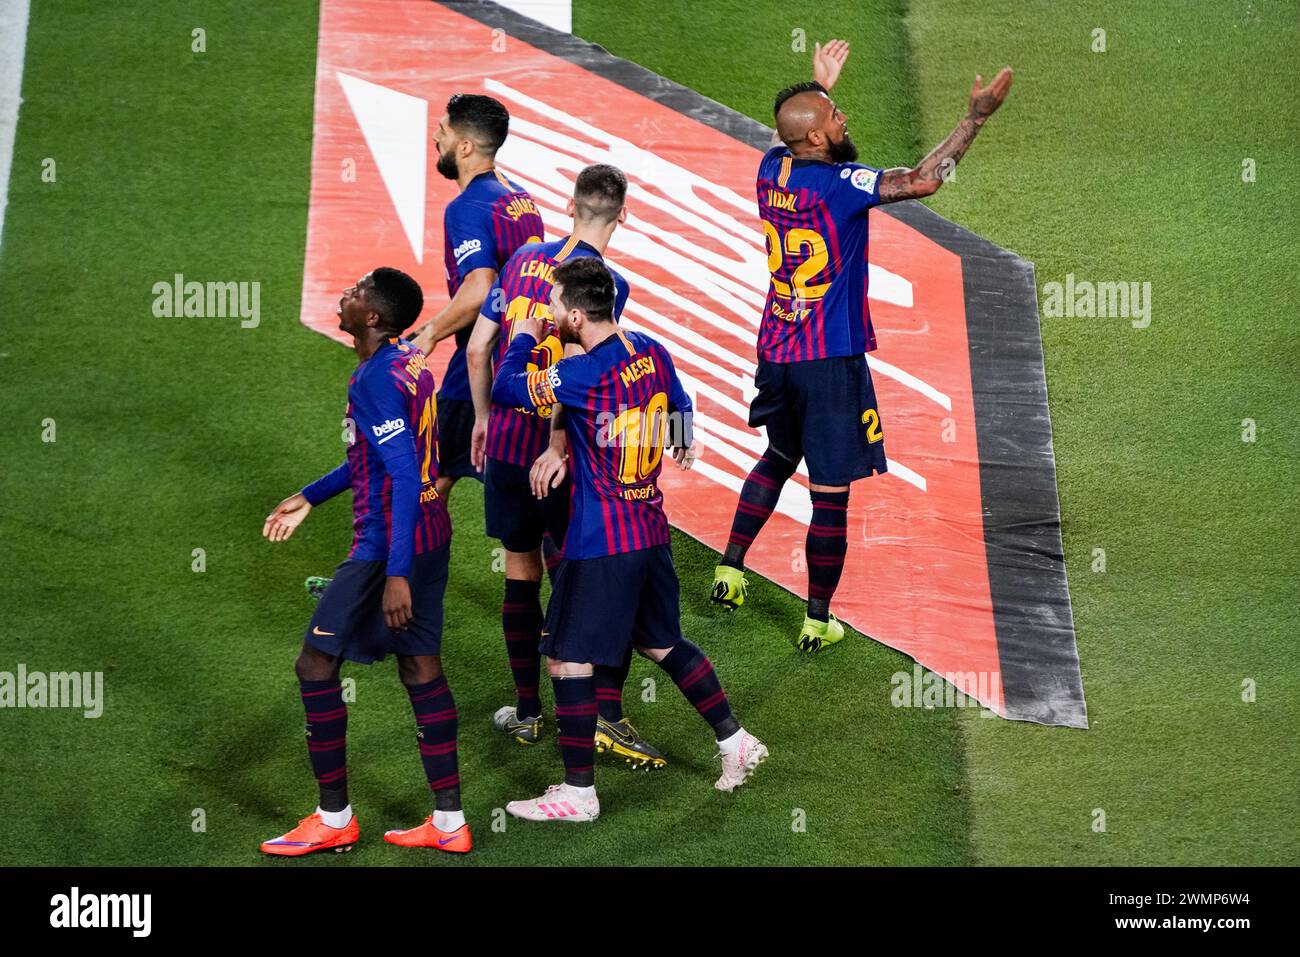 LIONEL MESSI, BARCELONA FC, 2019: Lionel Messi scores the winning goal in the 62nd minute and celebrates with his teammates as Vidal fires up the crowd. The final game of the La Liga 2018-19 season in Spain between Barcelona FC and Levante at Camp Nou, Barcelona on 27 April 2019. Barca won the game 1-0 with a second half Messi goal to clinch back-to-back La Liga titles and their eighth in 11 years. Stock Photo